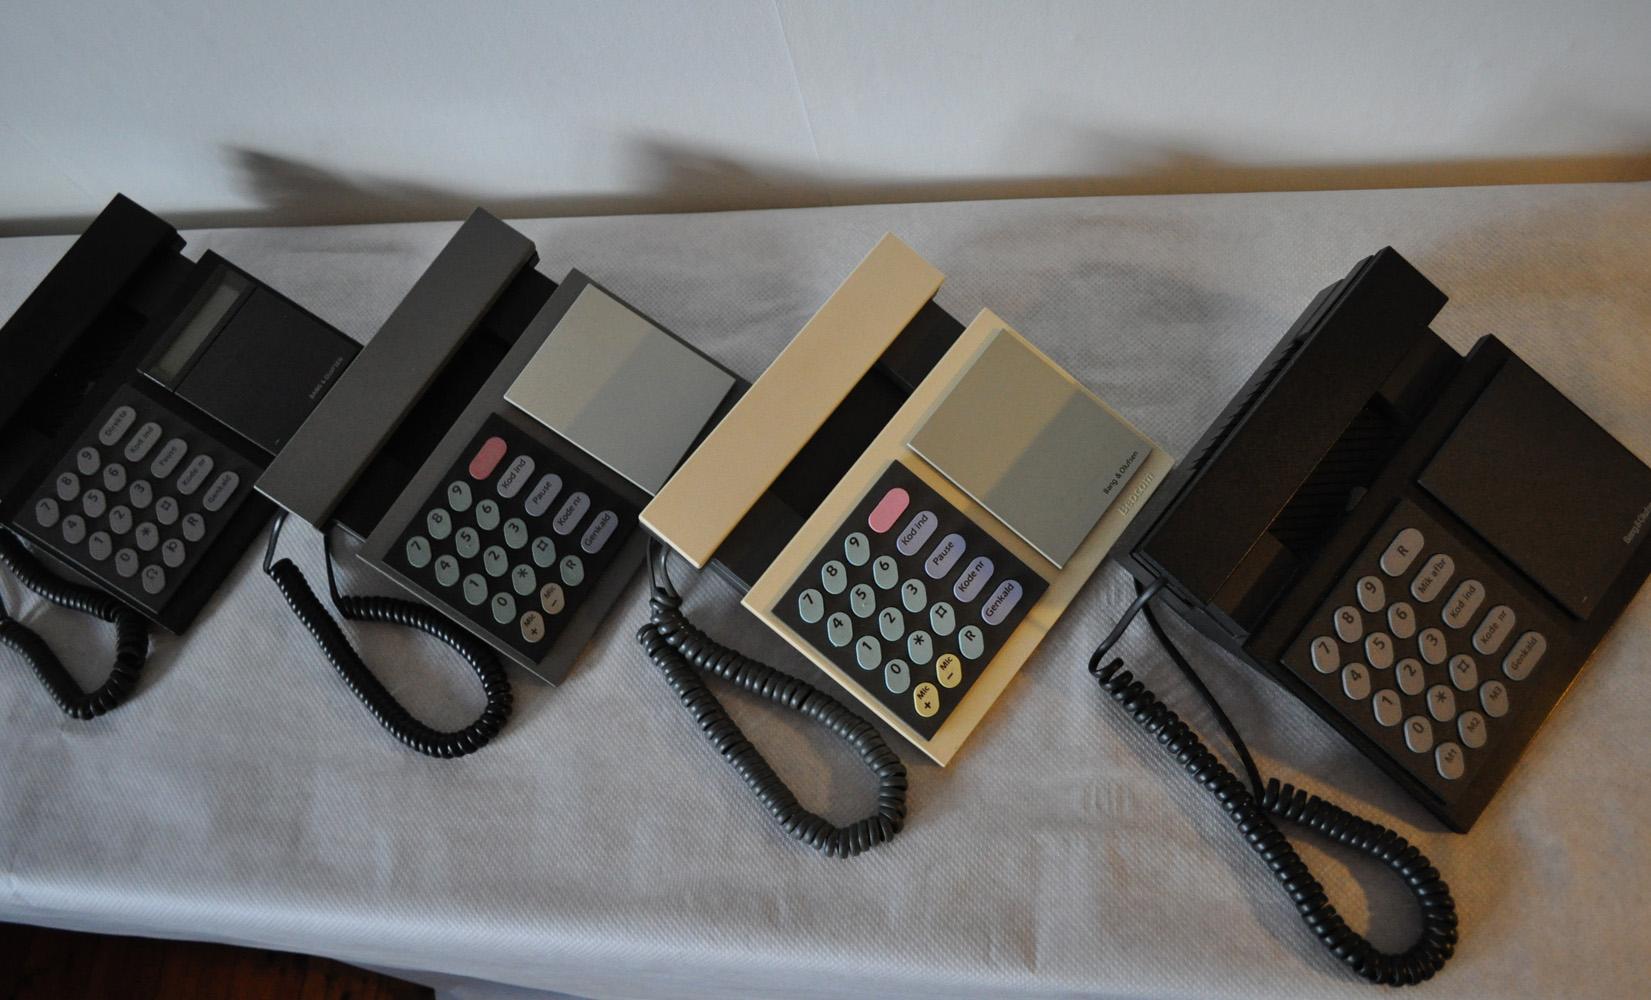 Danish Iconic Beocom 600 Telephone from 1986 by Bang & Olusfen For Sale